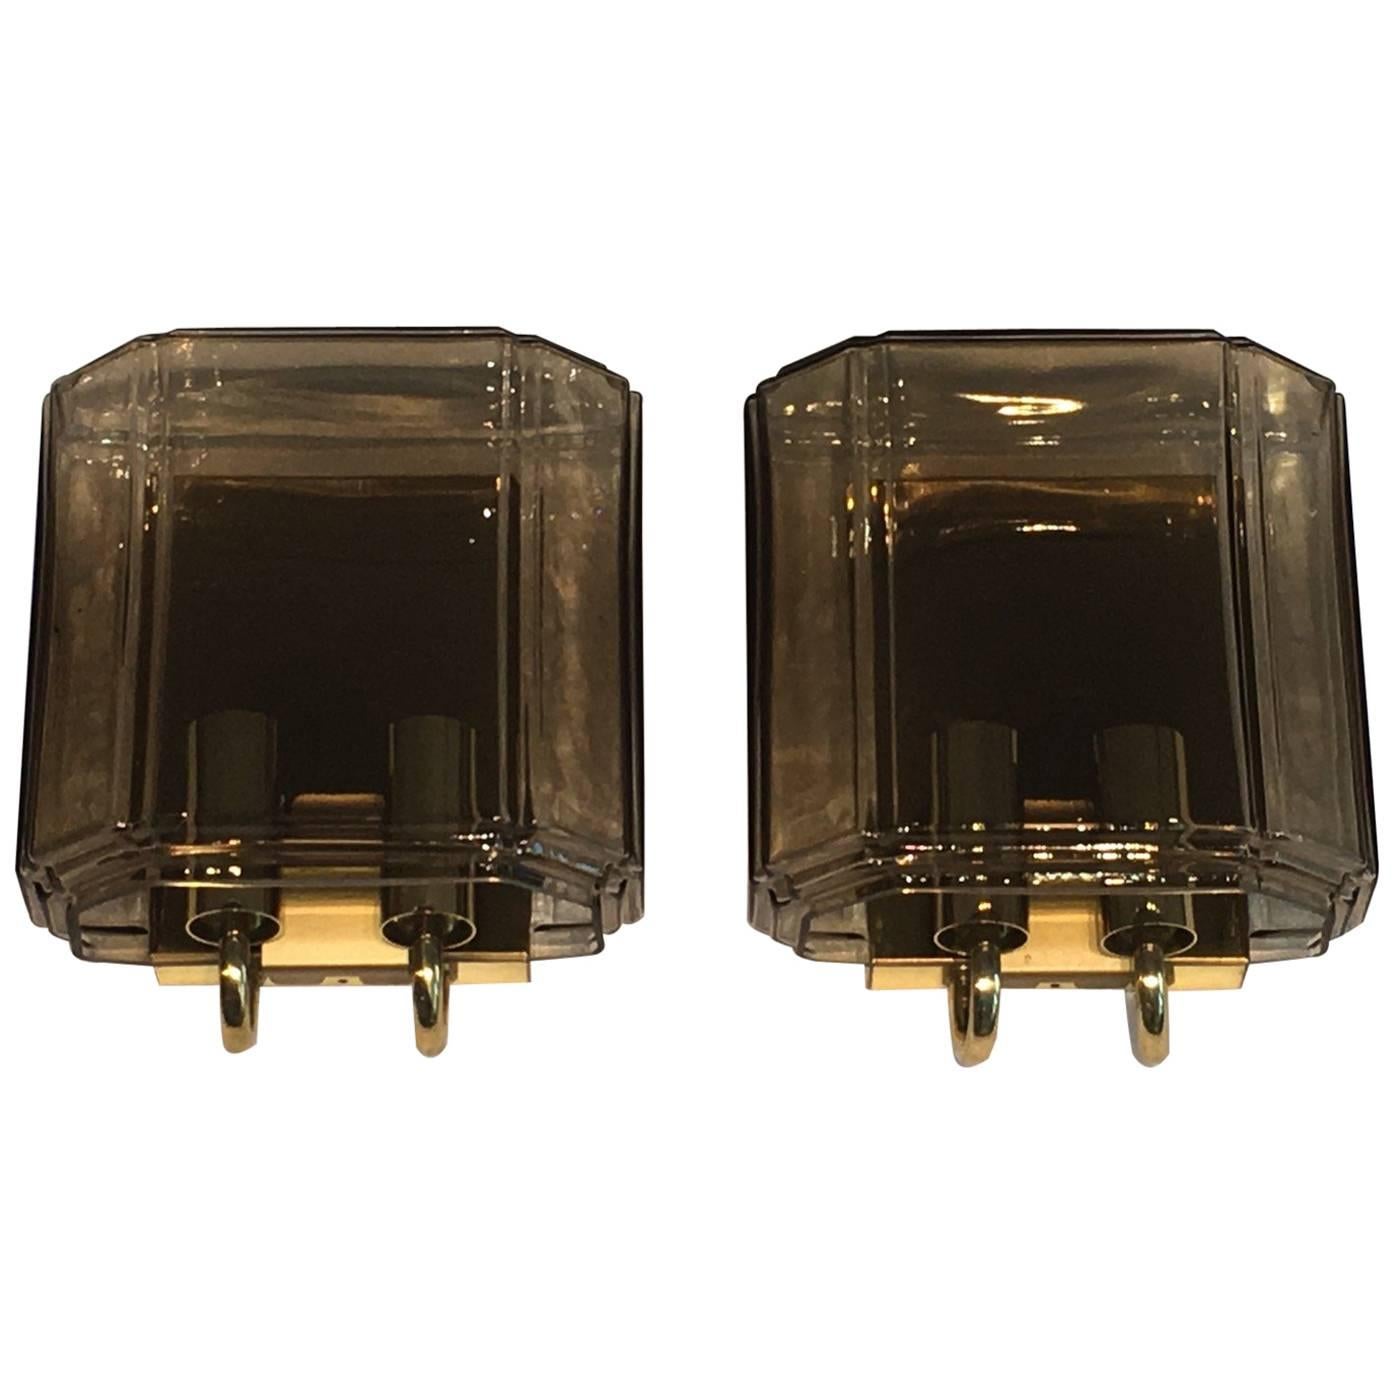 Pair of Amber Square Glass Sconces Limburg, Germany